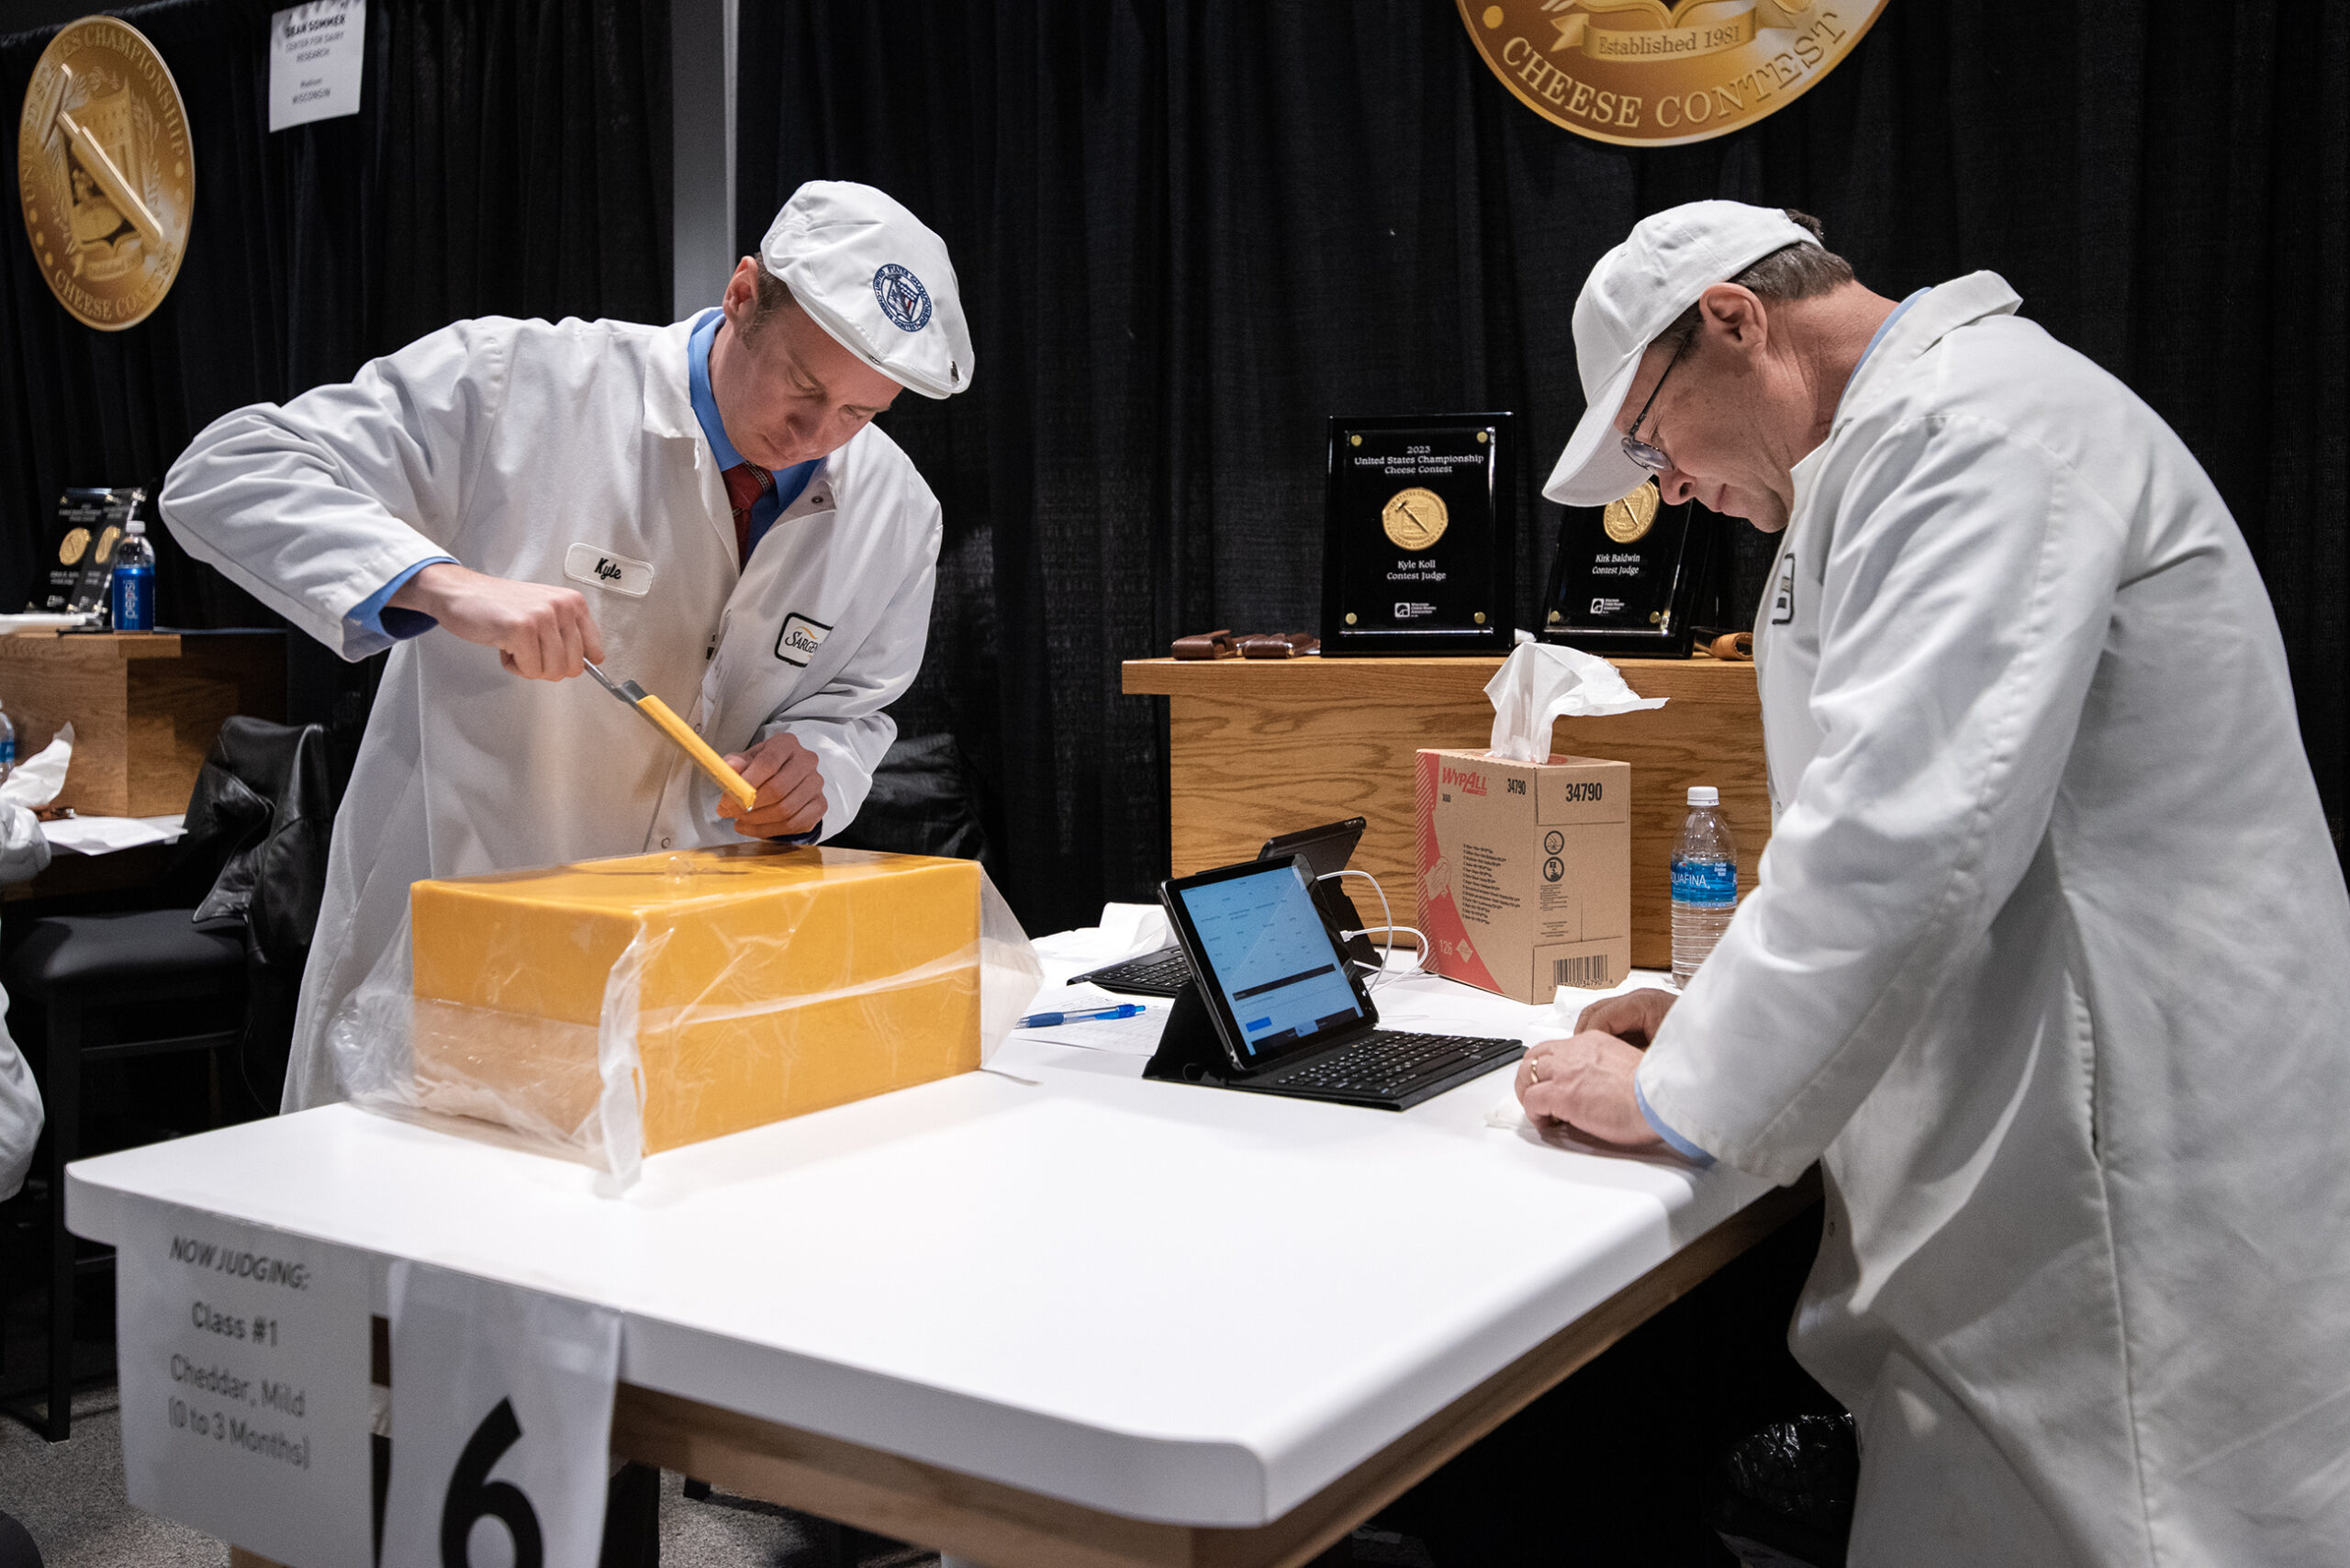 Two judges stand at a table around a large block of yellow cheese.